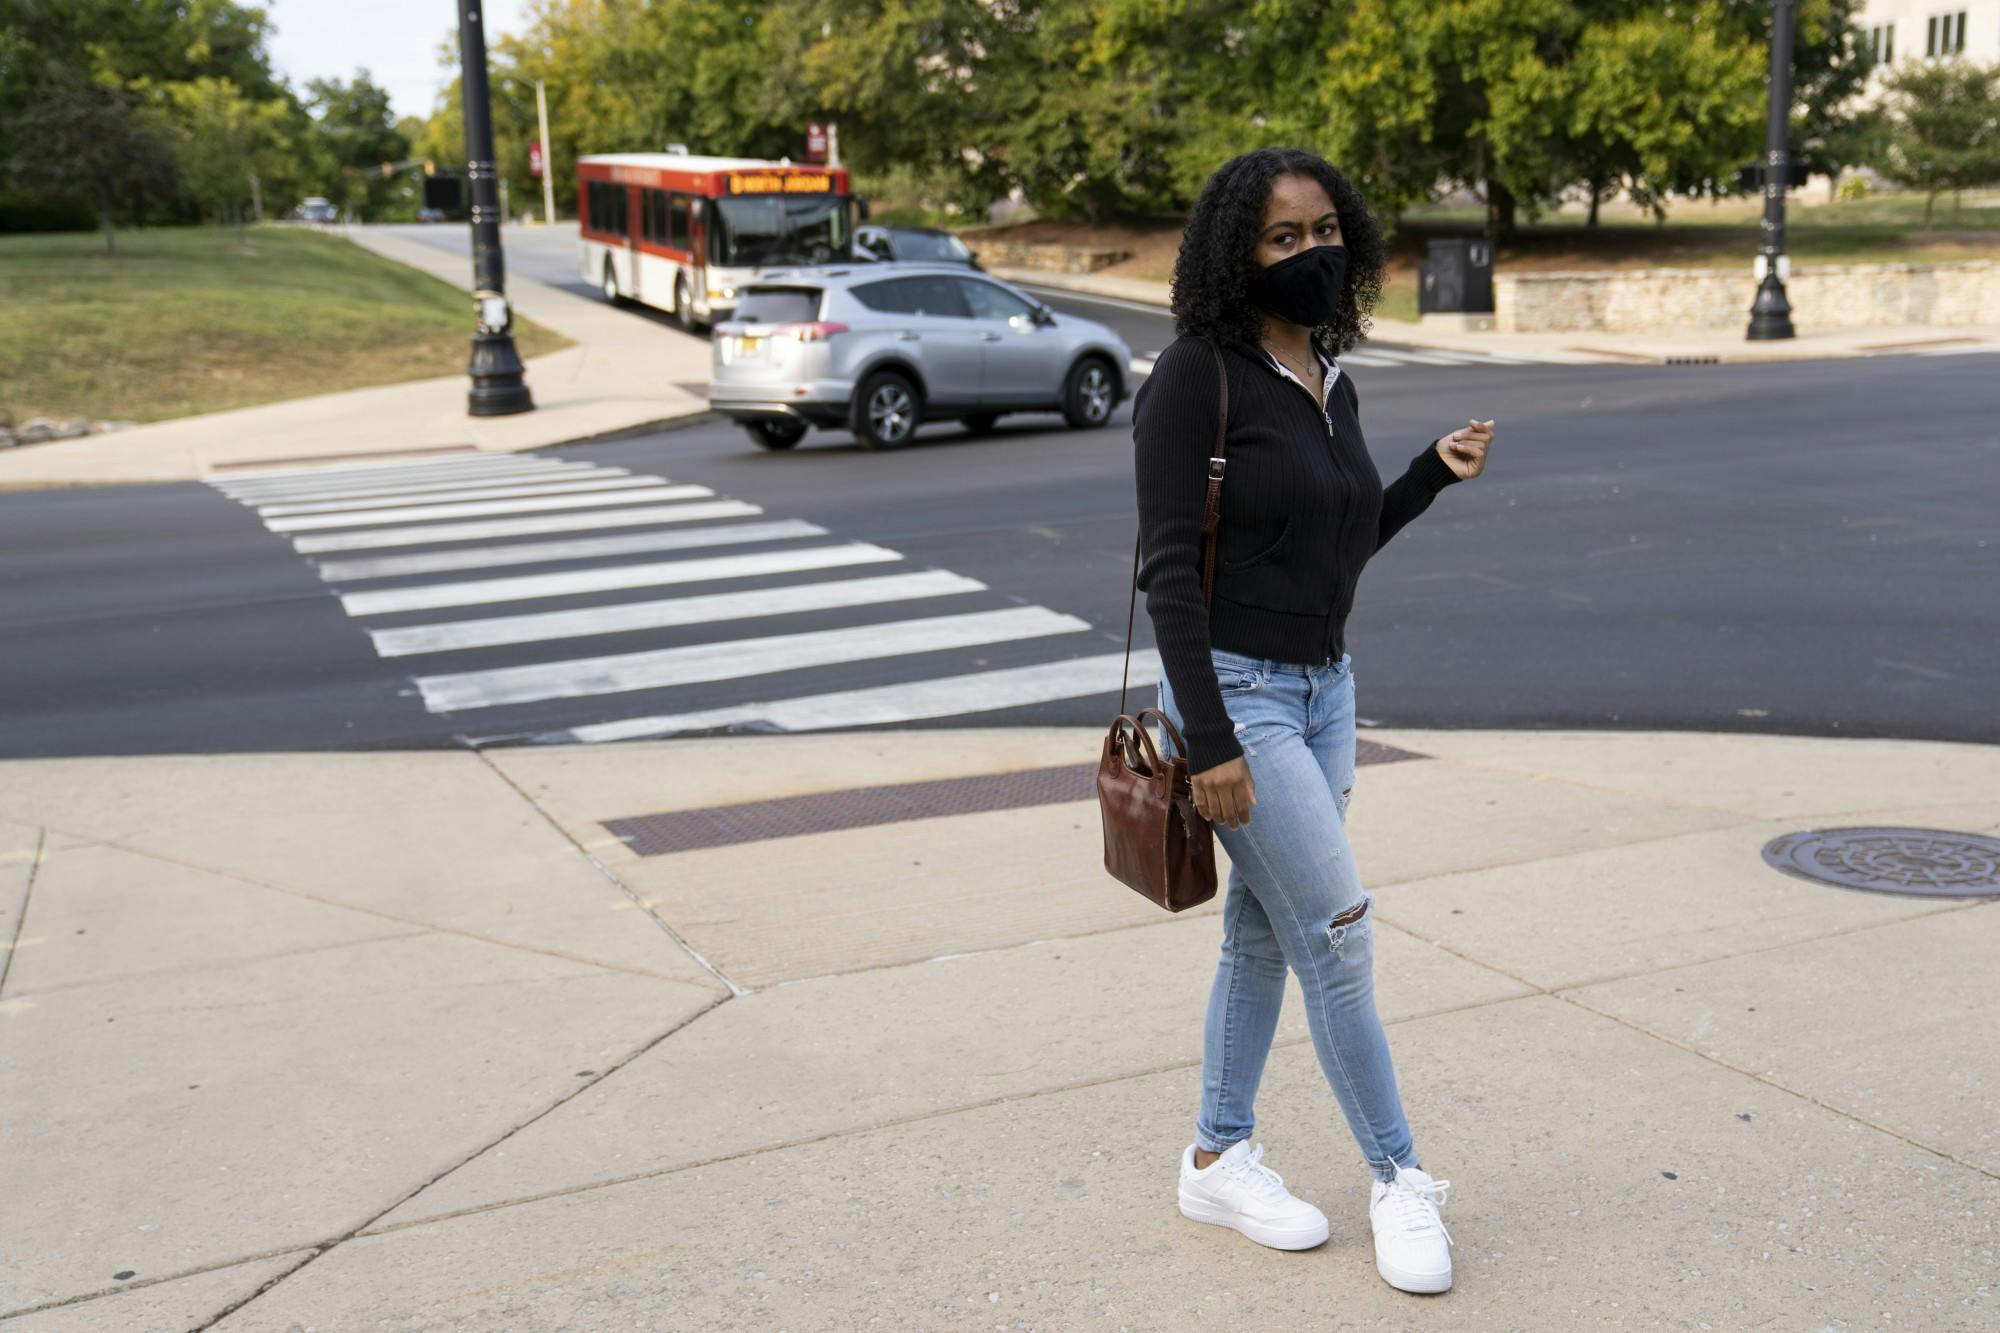 Aluko talks about the second bias incident that also happened during her freshman year of college. Afterwards, she tried to not walk home later at night by herself in order to avoid anything like that happening to her again.